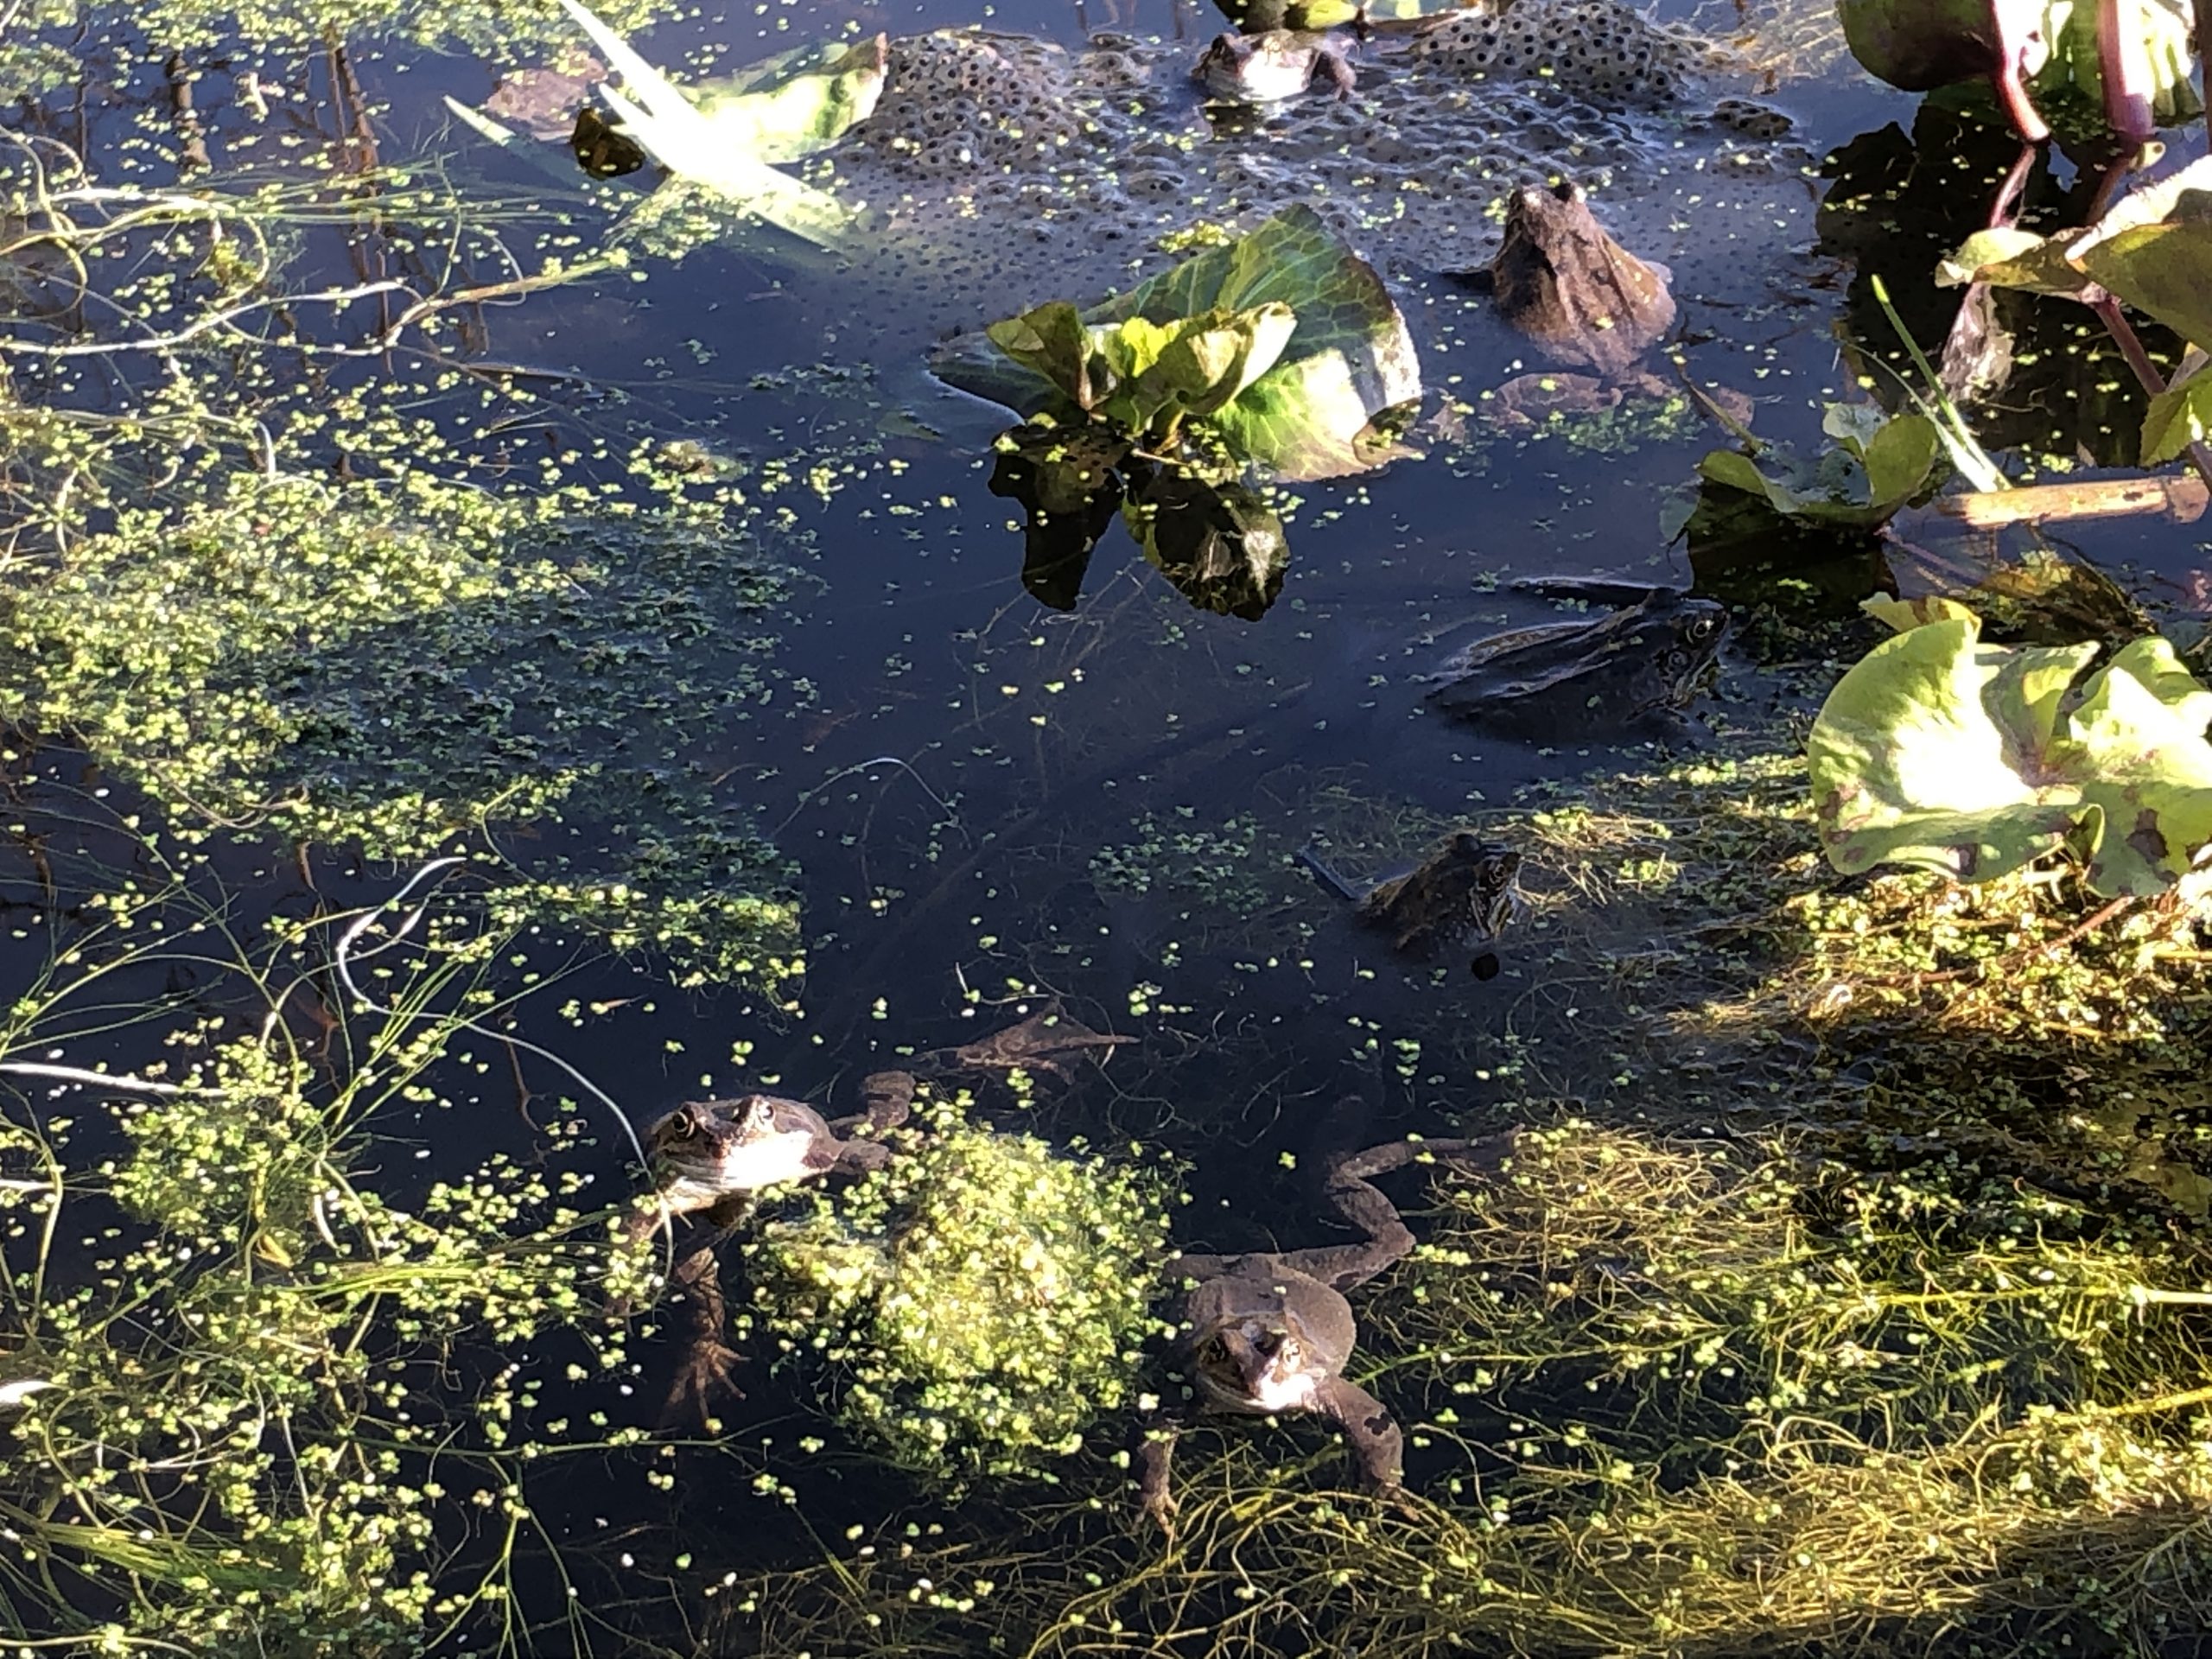 Frogs and spawn in pond